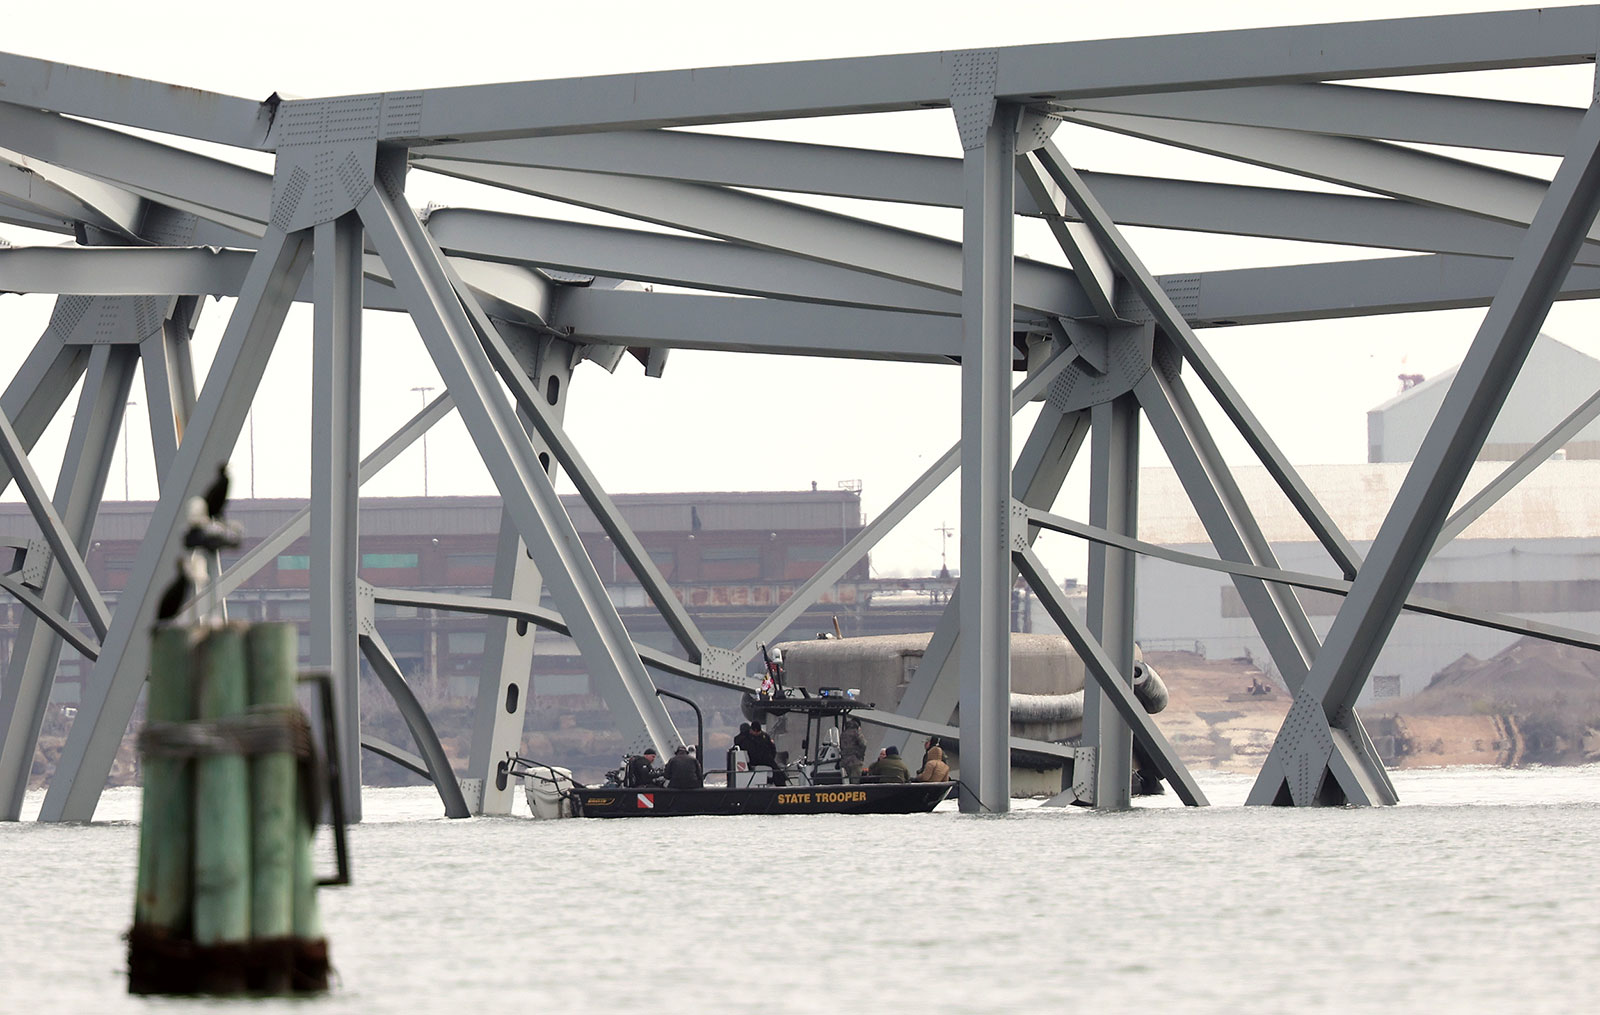 Maryland state troopers patrol at the scene after the cargo ship Dali ran into and collapsed the Francis Scott Key Bridge on Tuesday in Baltimore.